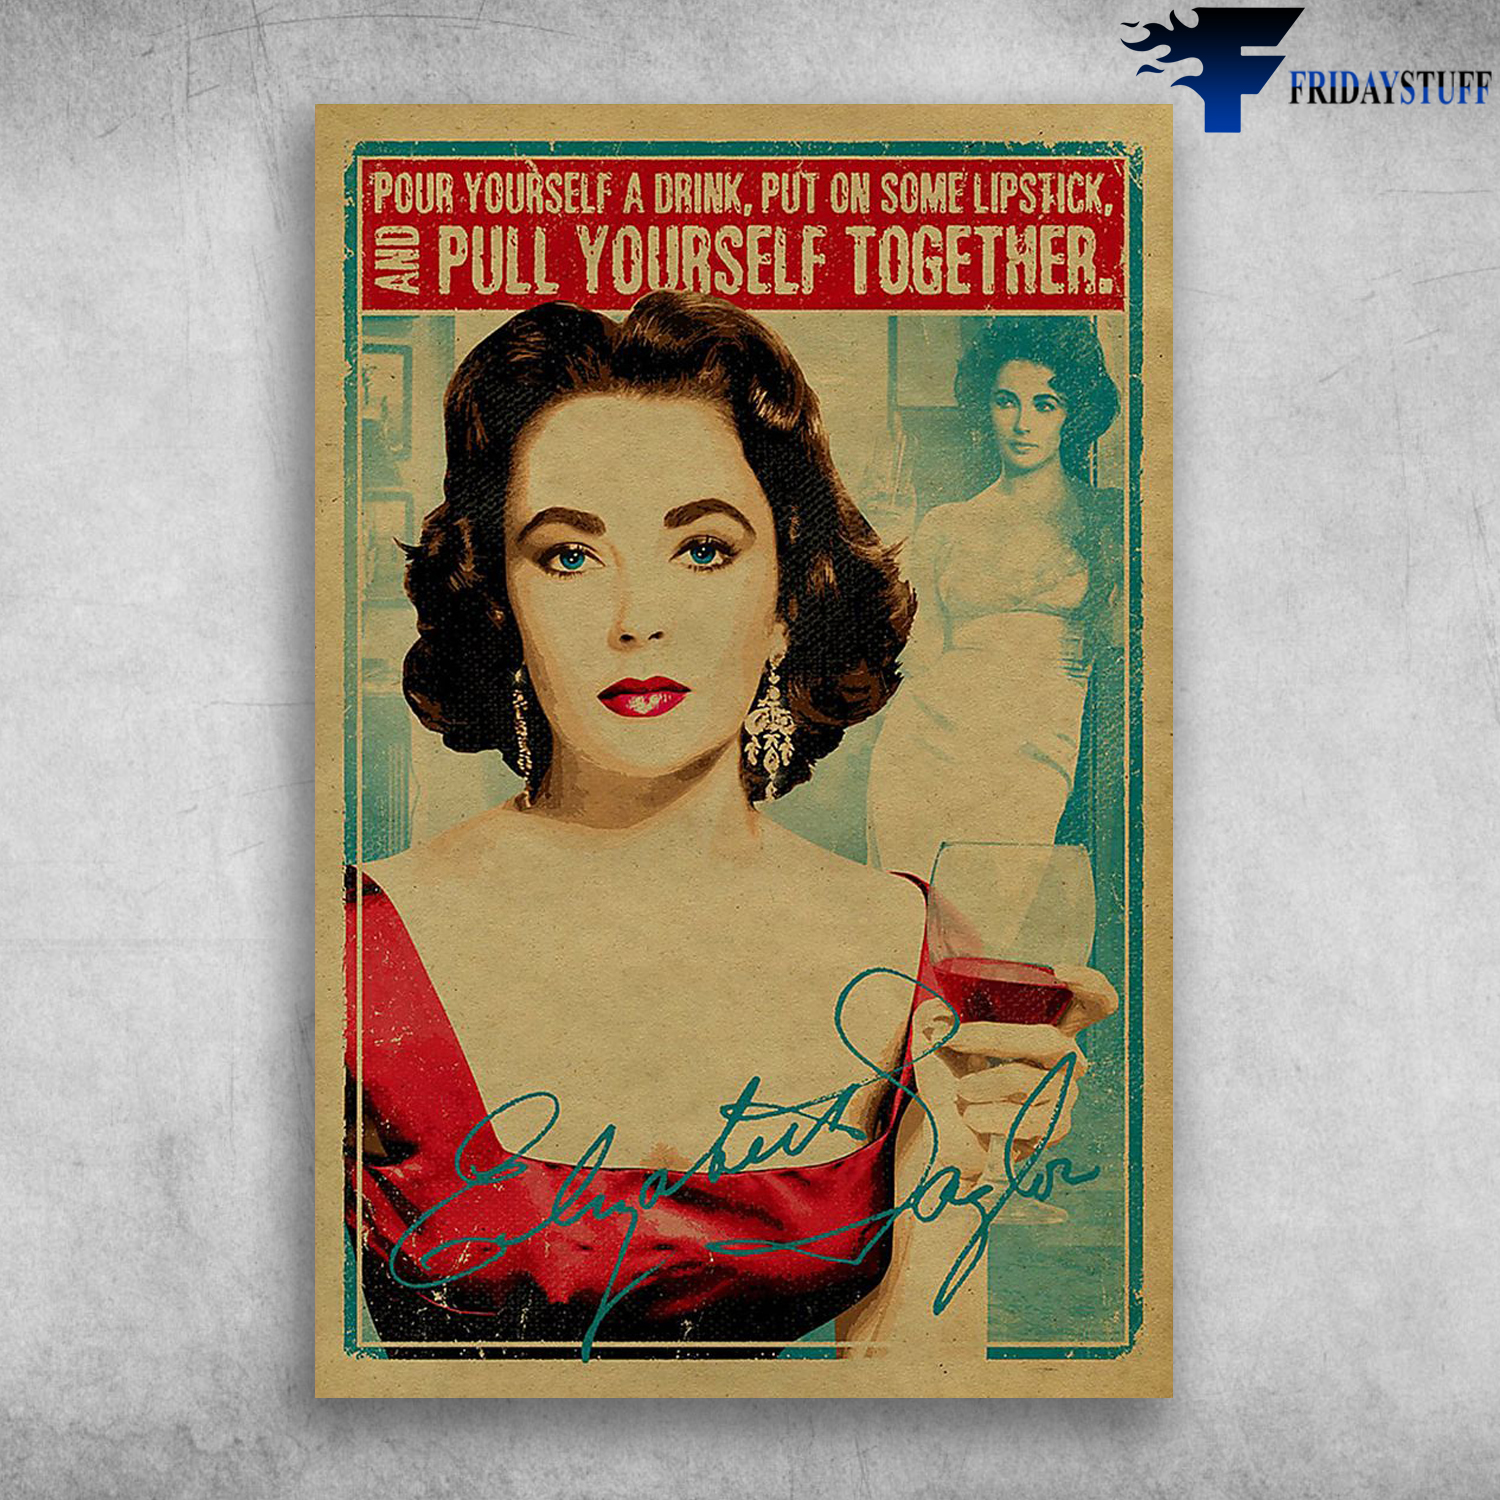 Pour Yourself A Drink, Put On Some Lipstick And Pull Yourself Together - Elizabeth Taylor